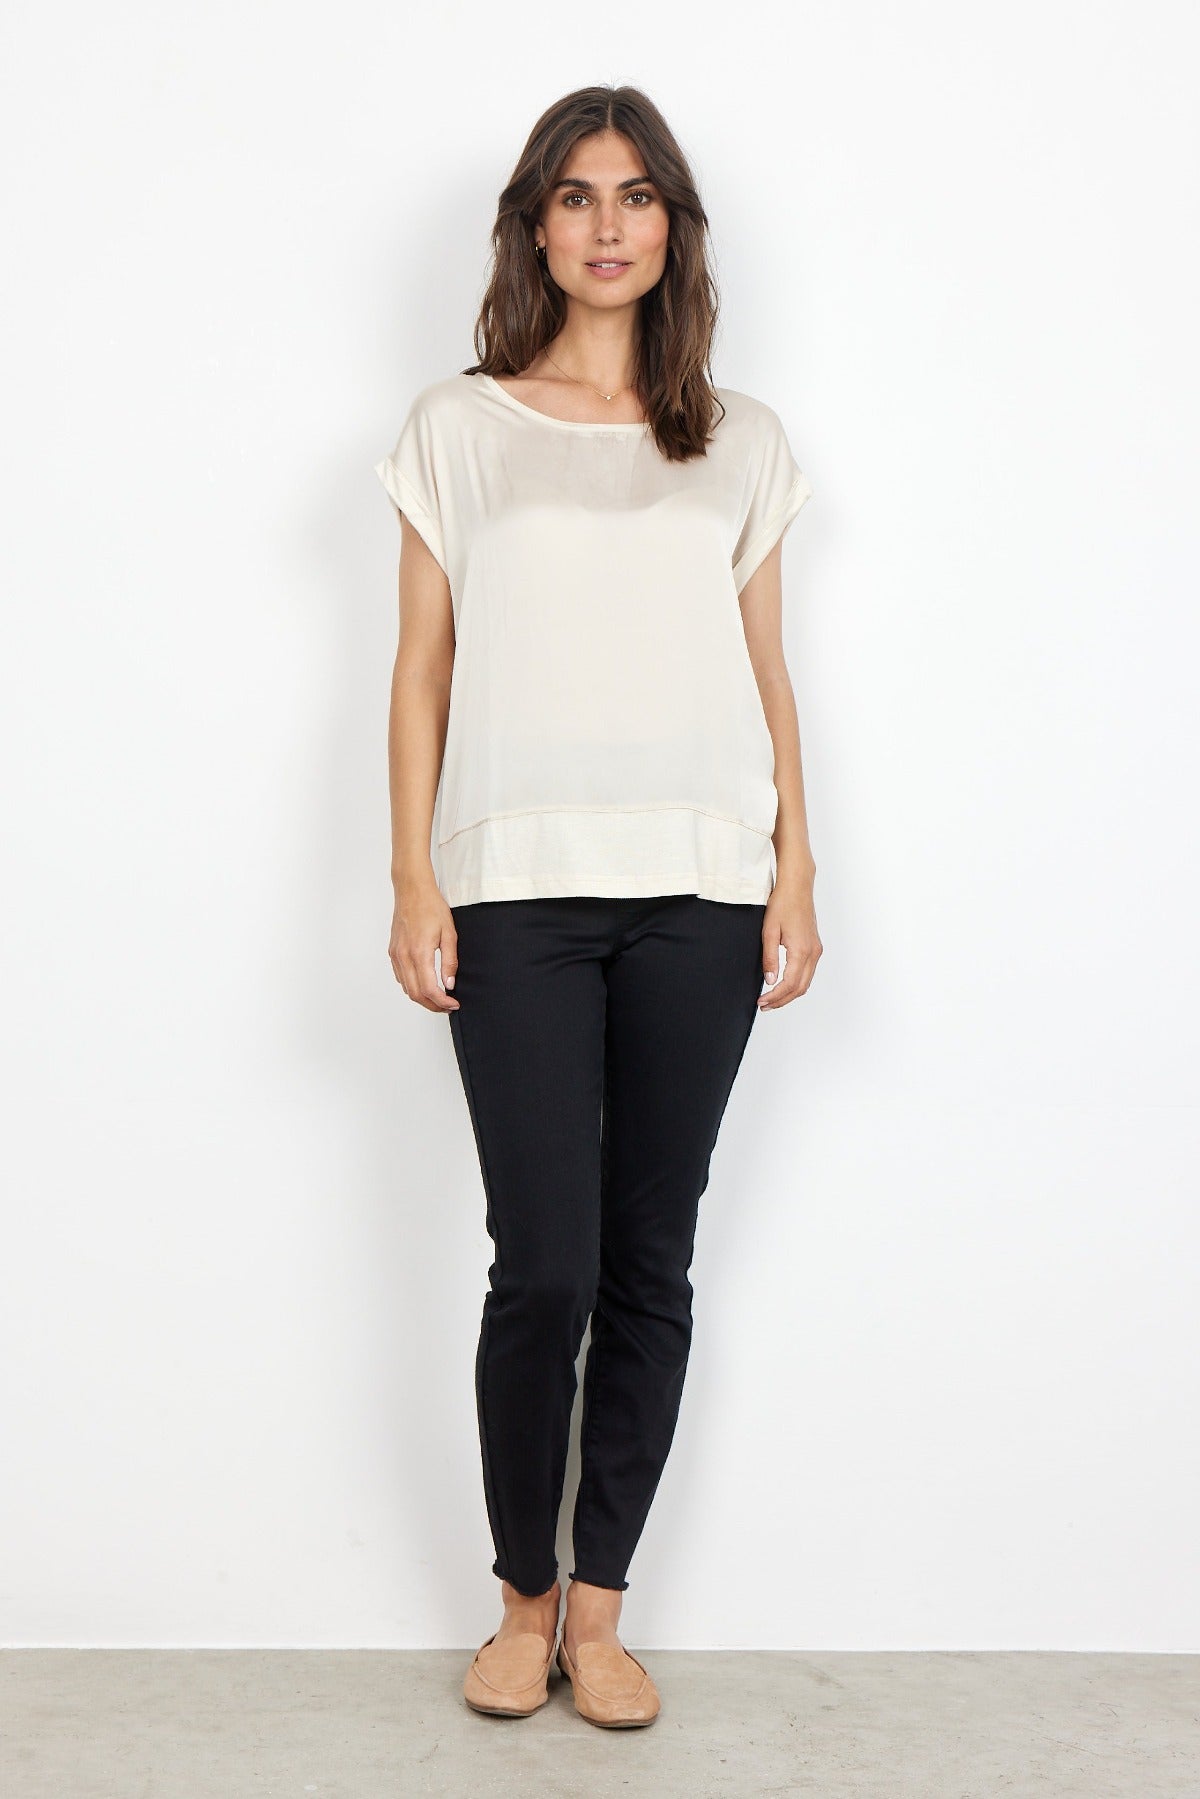 The Thilde Top in Cream